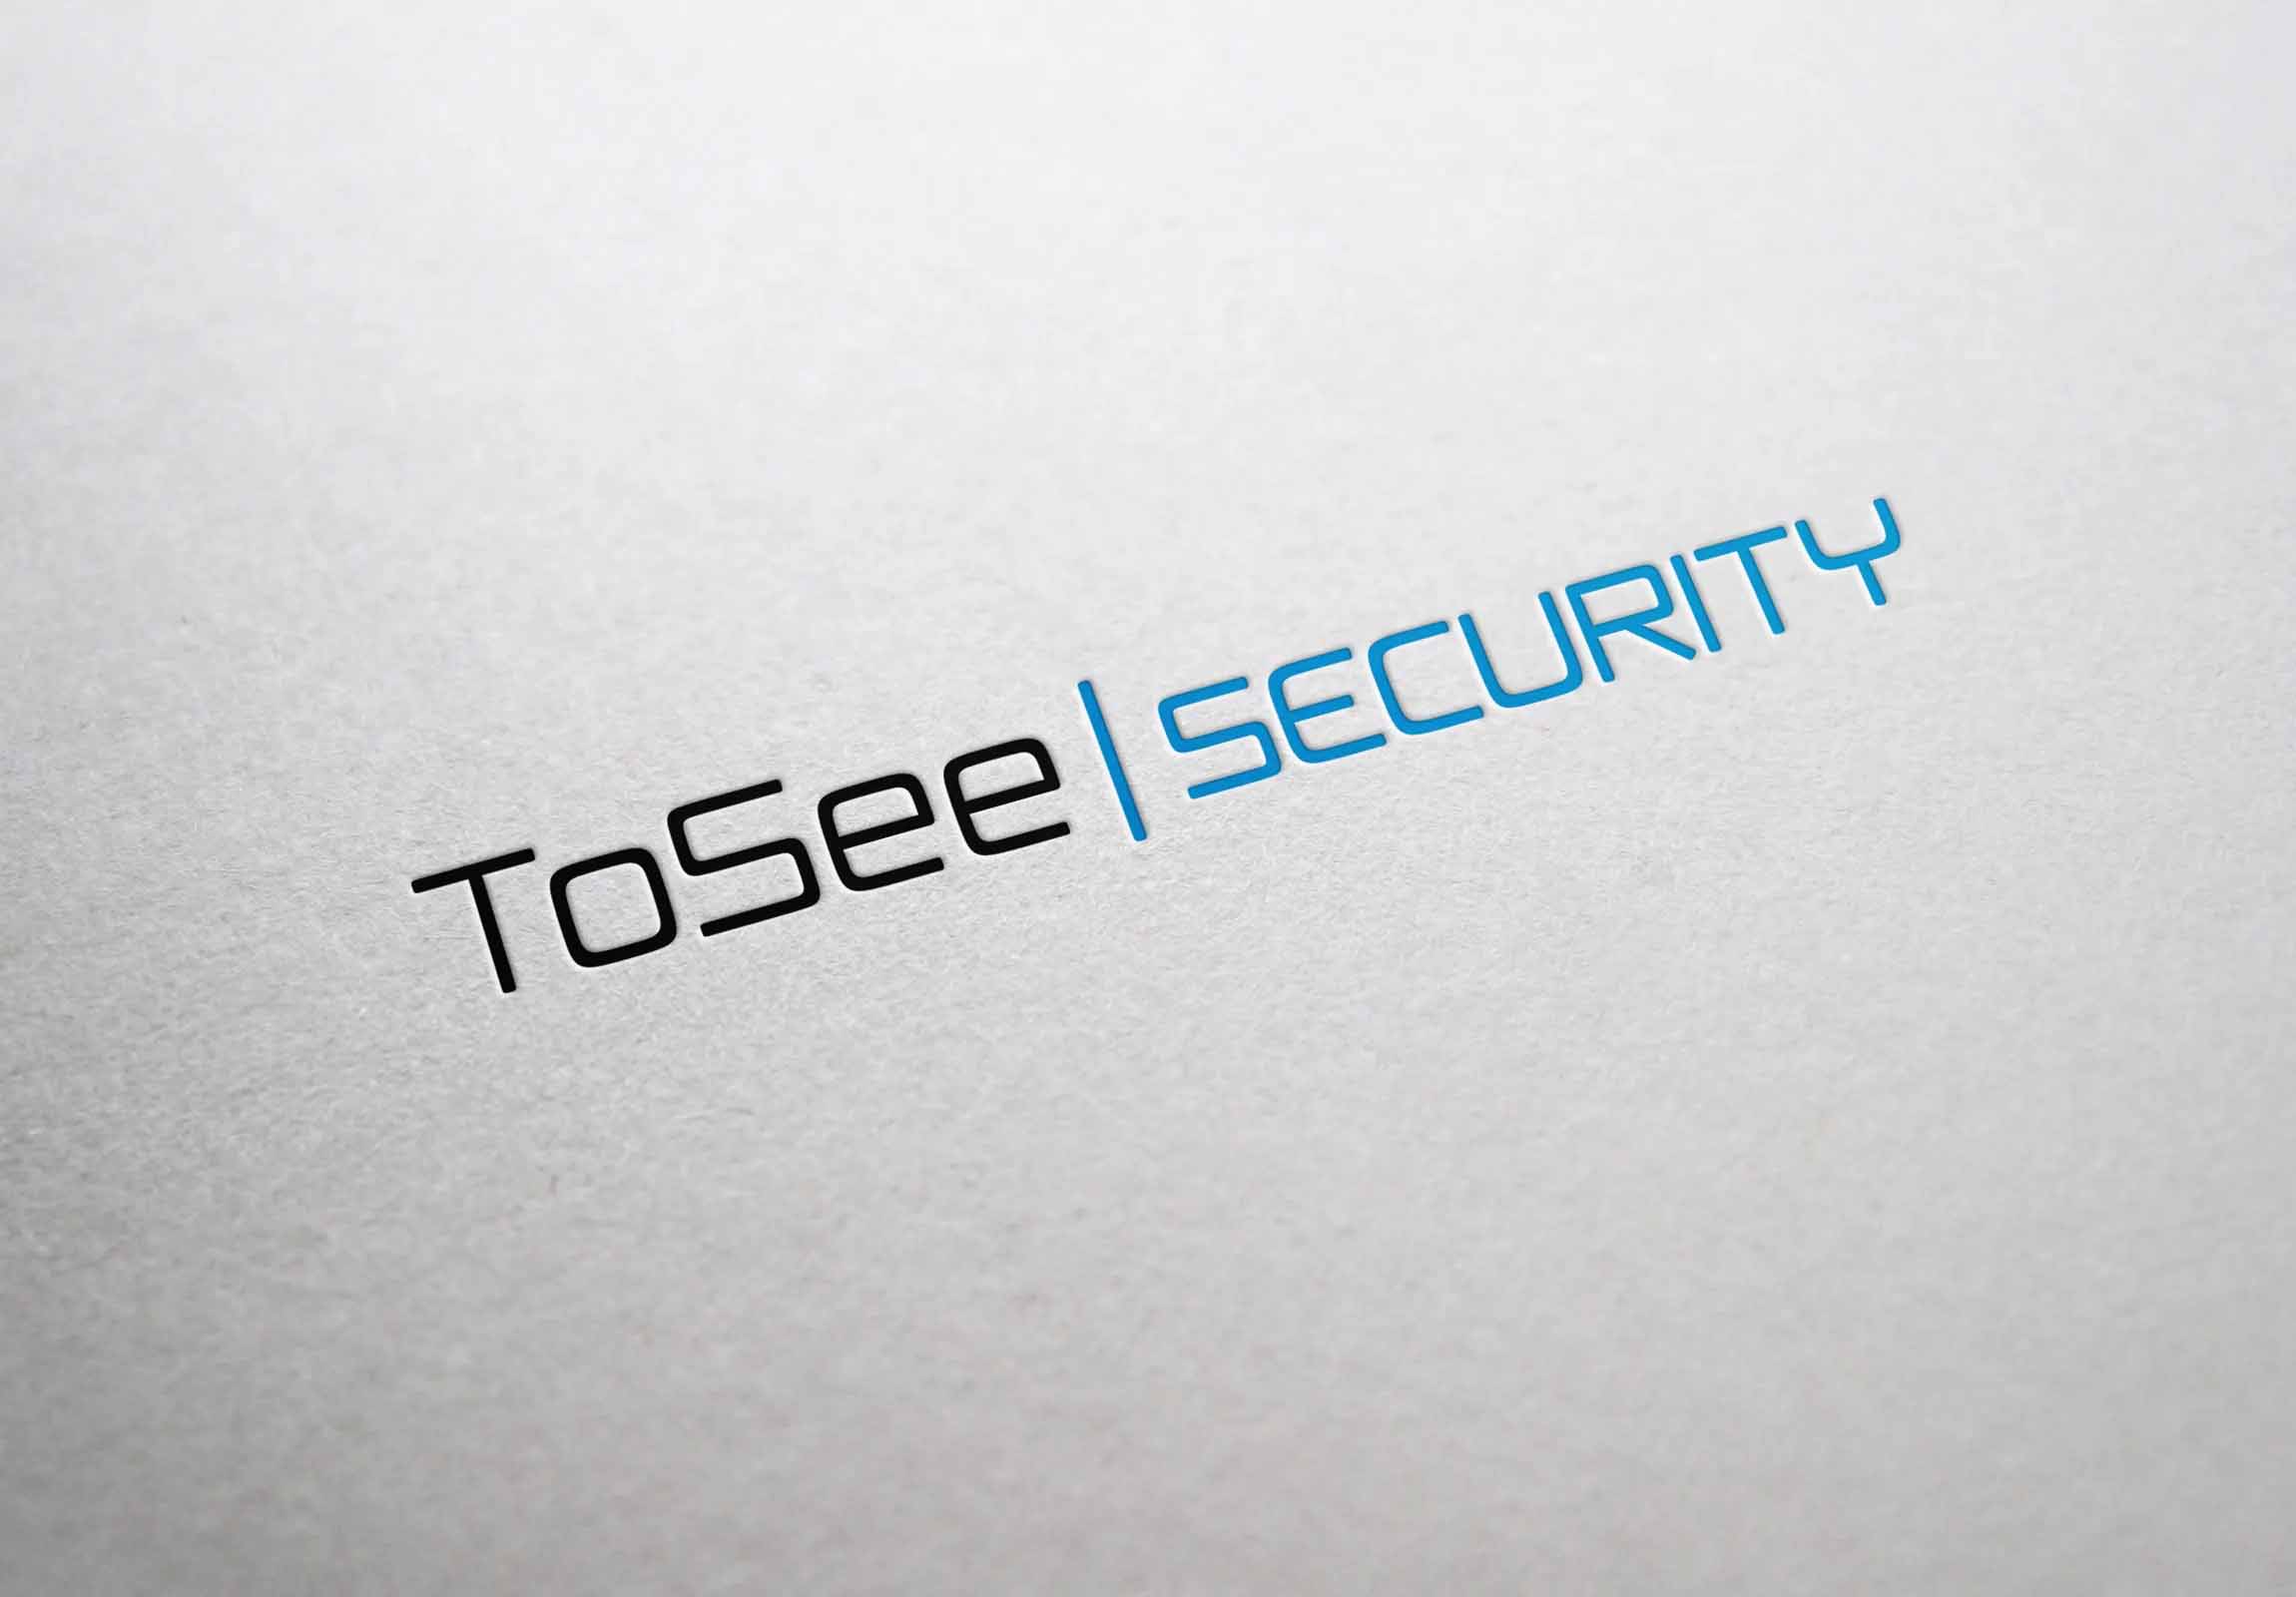 TooSee-Security – BEVIN CREATIVE